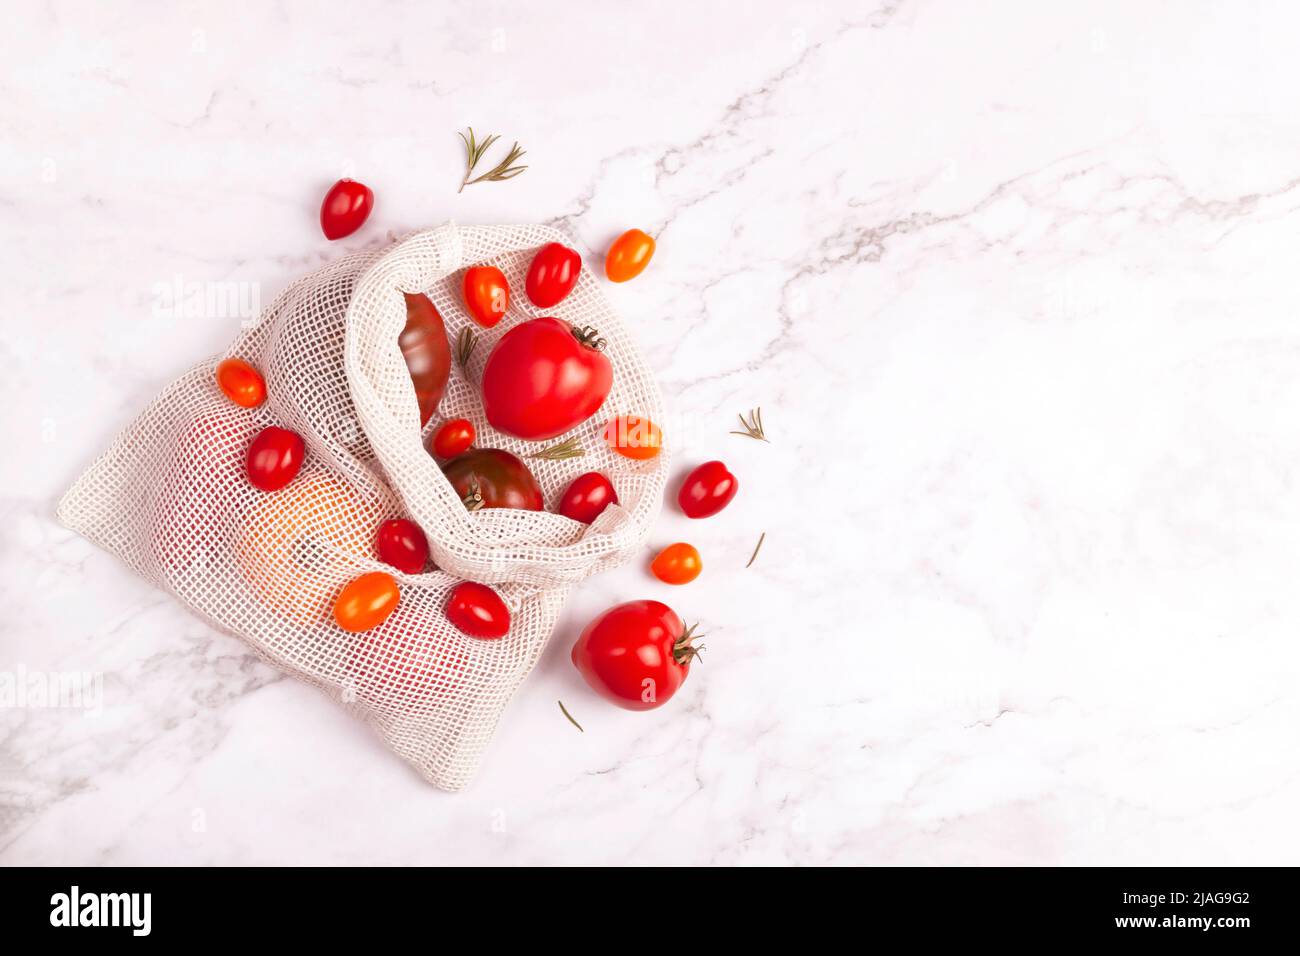 Cotton bag with tomatoes of different varieties and colors, tomato season Stock Photo